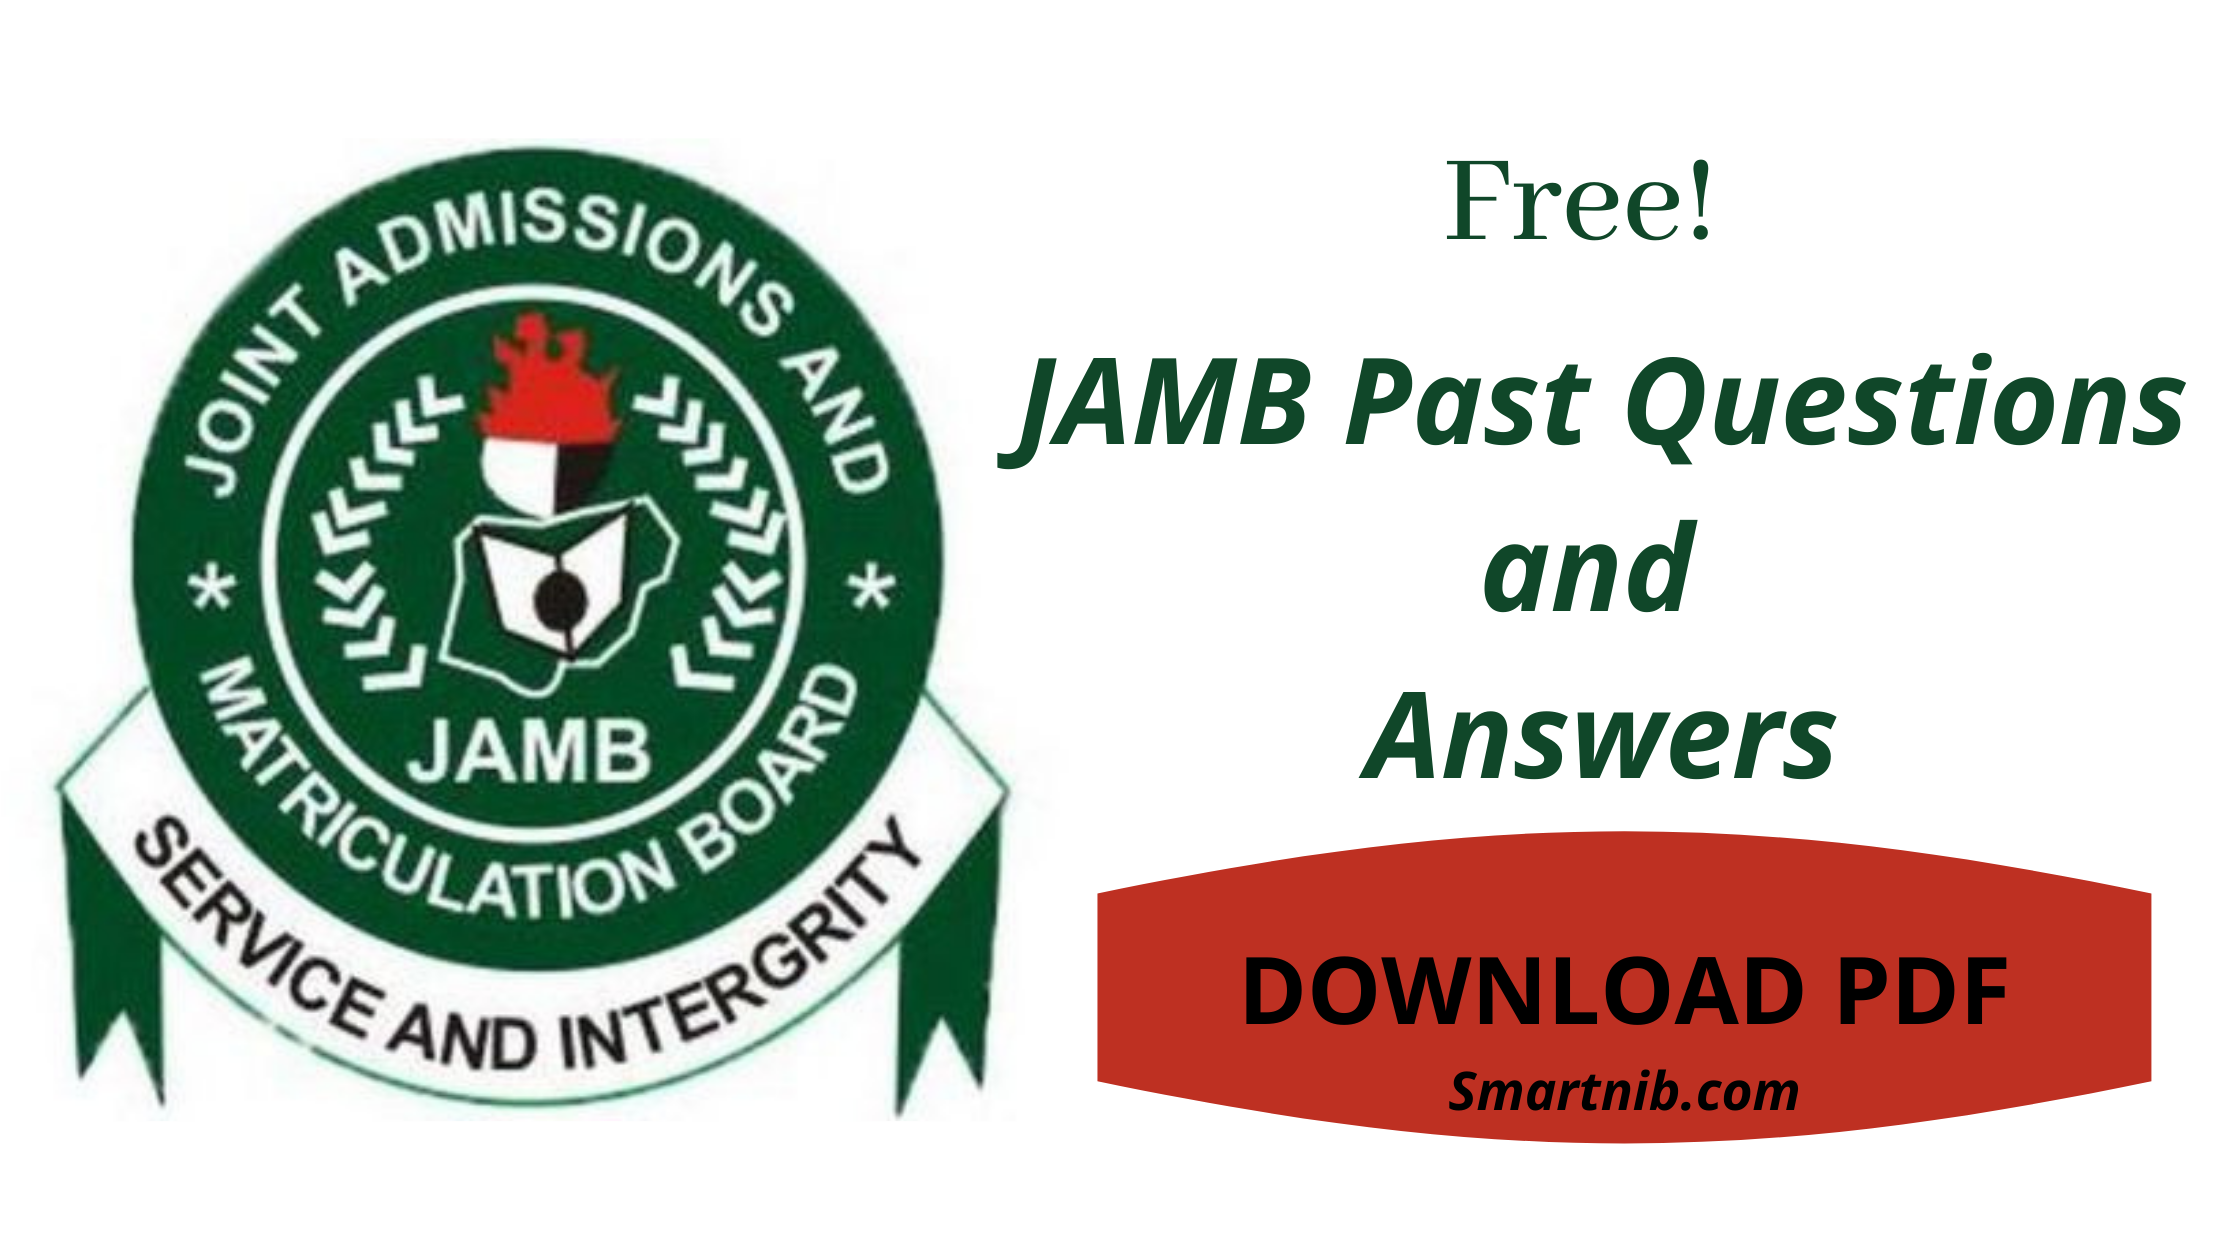 Free Download of JAMB Past Questions and Answers PDF for all Subjects